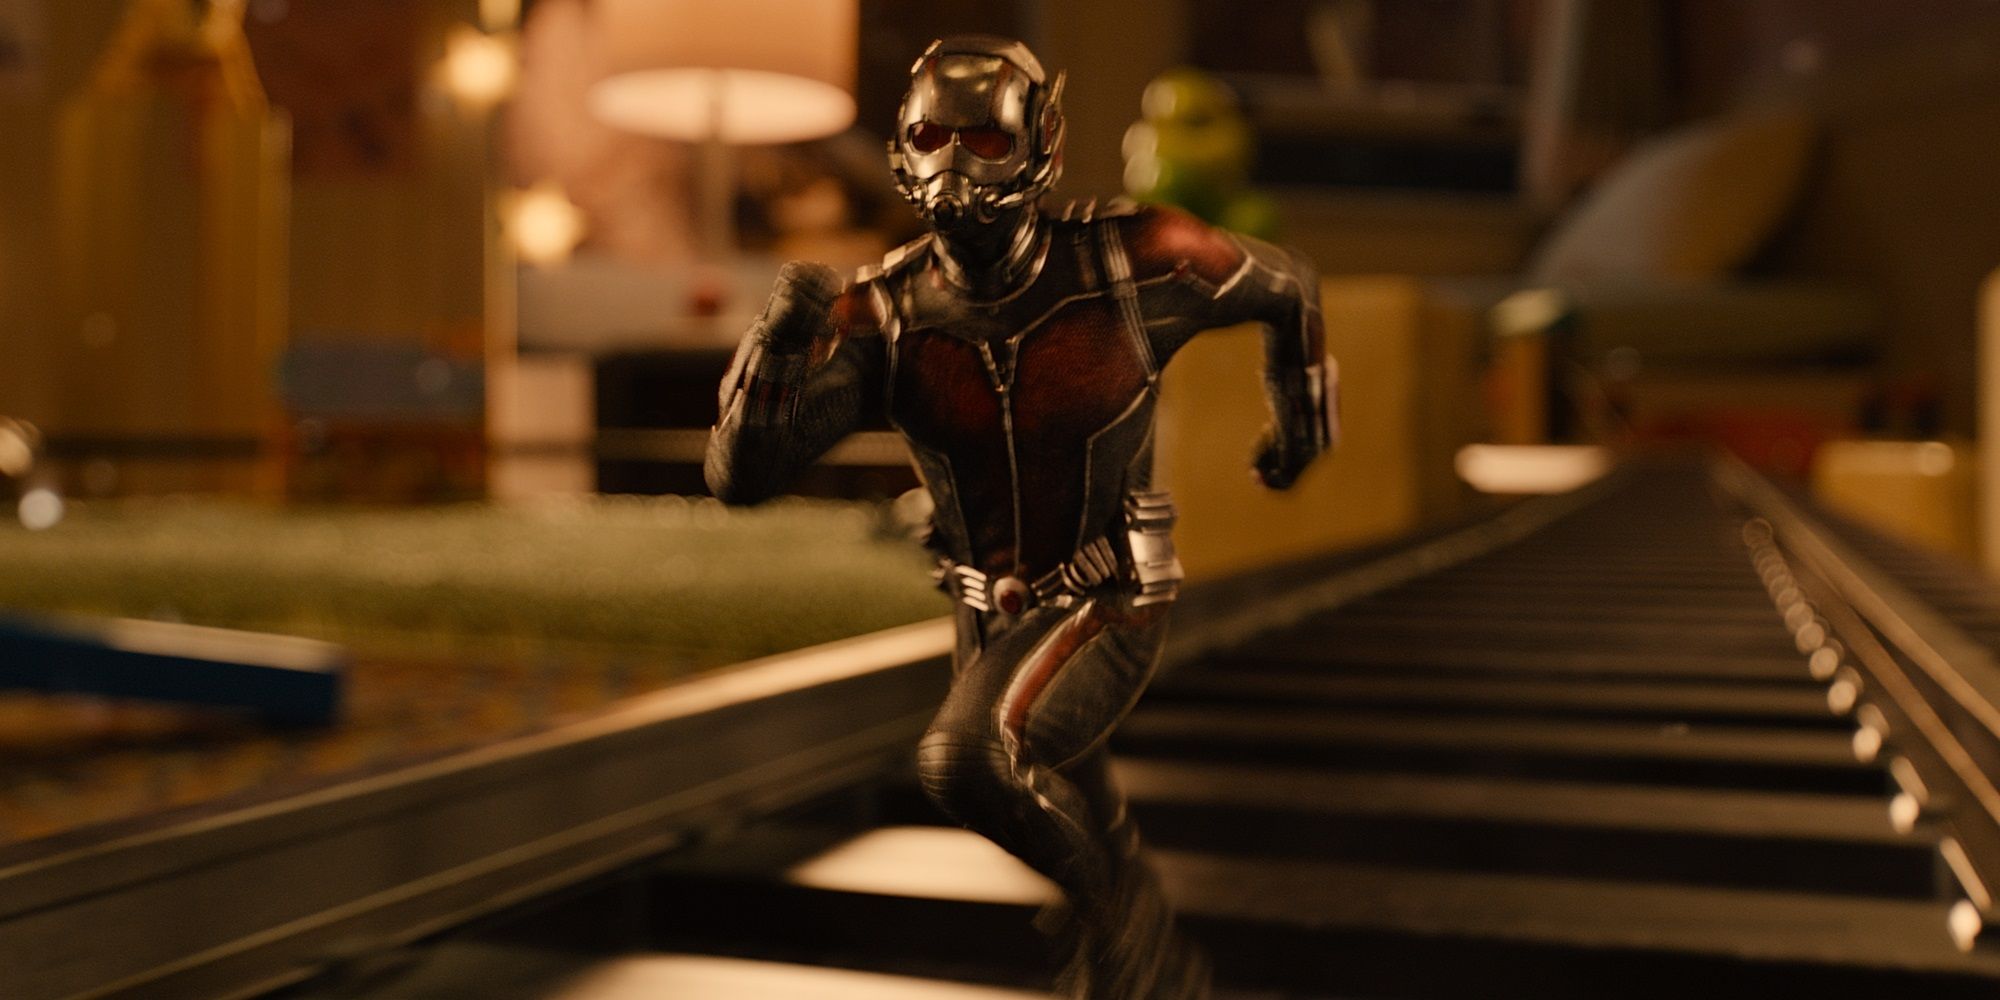 Scott Lang on a toy train track in Ant-Man